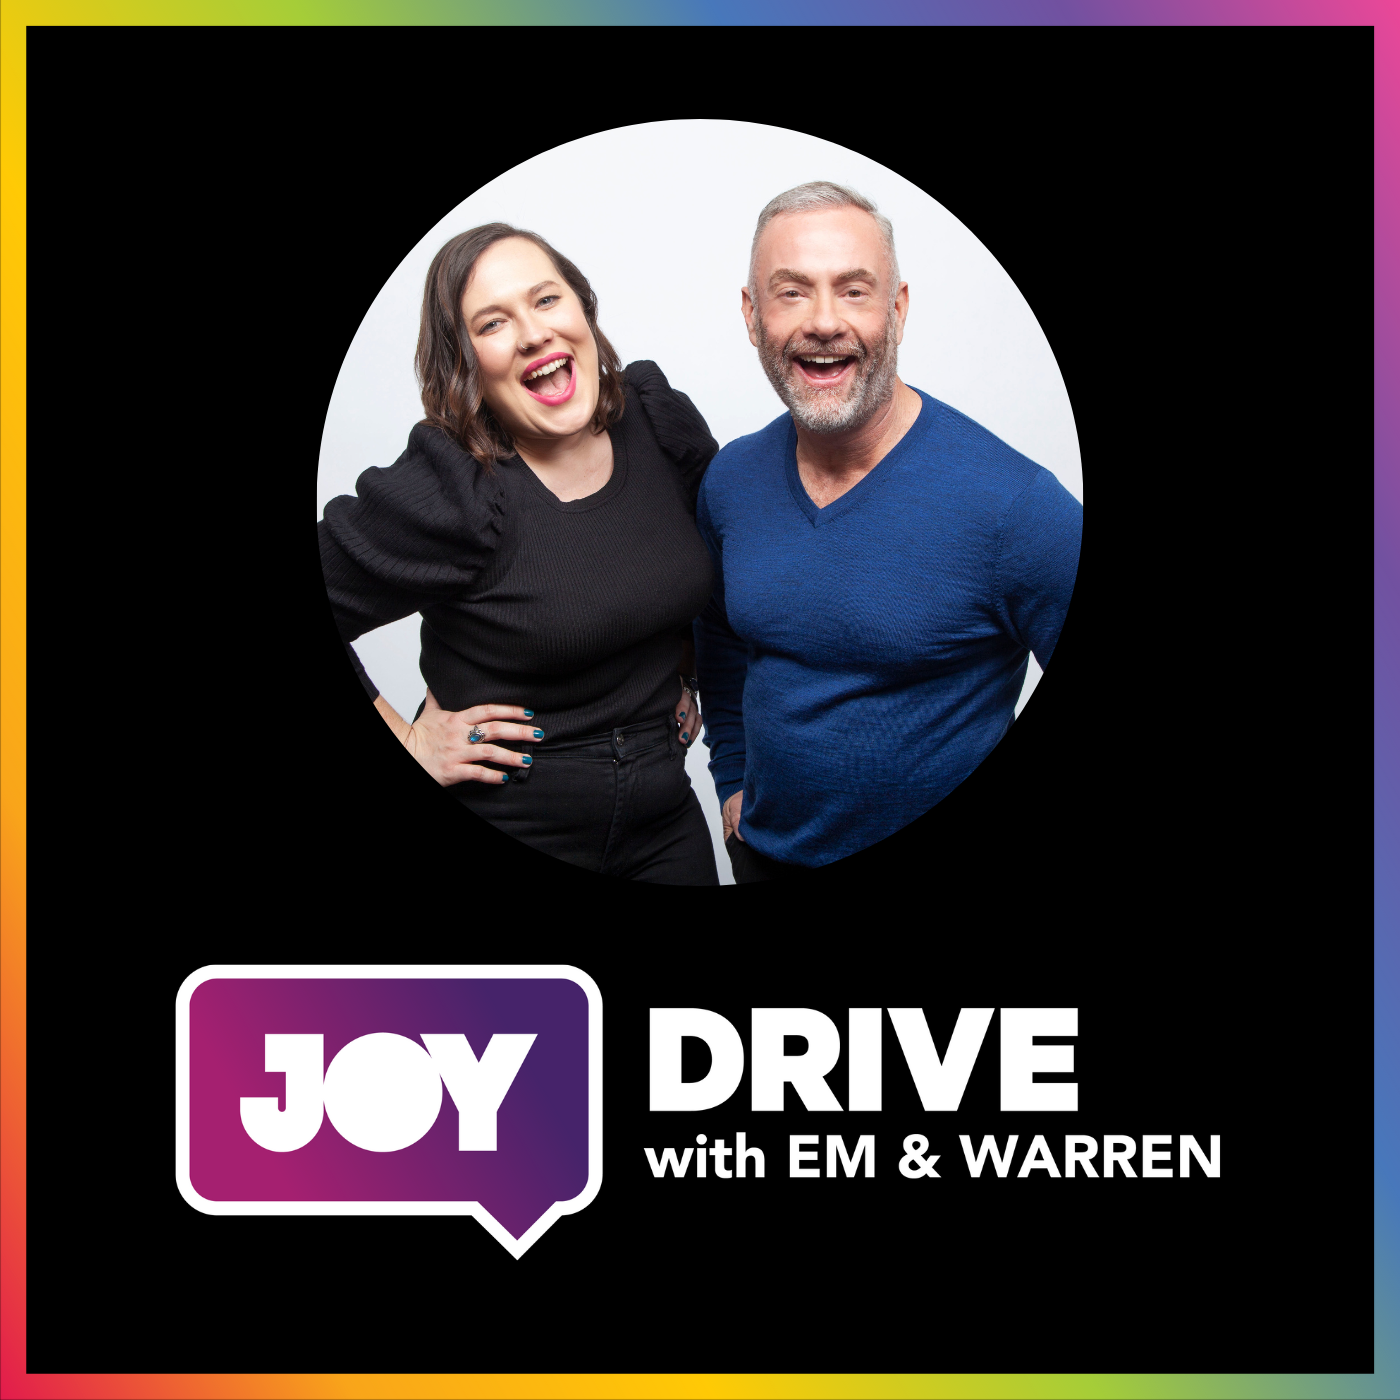 Scott Taylor x JOY Drive: New Play ‘Coming Out’